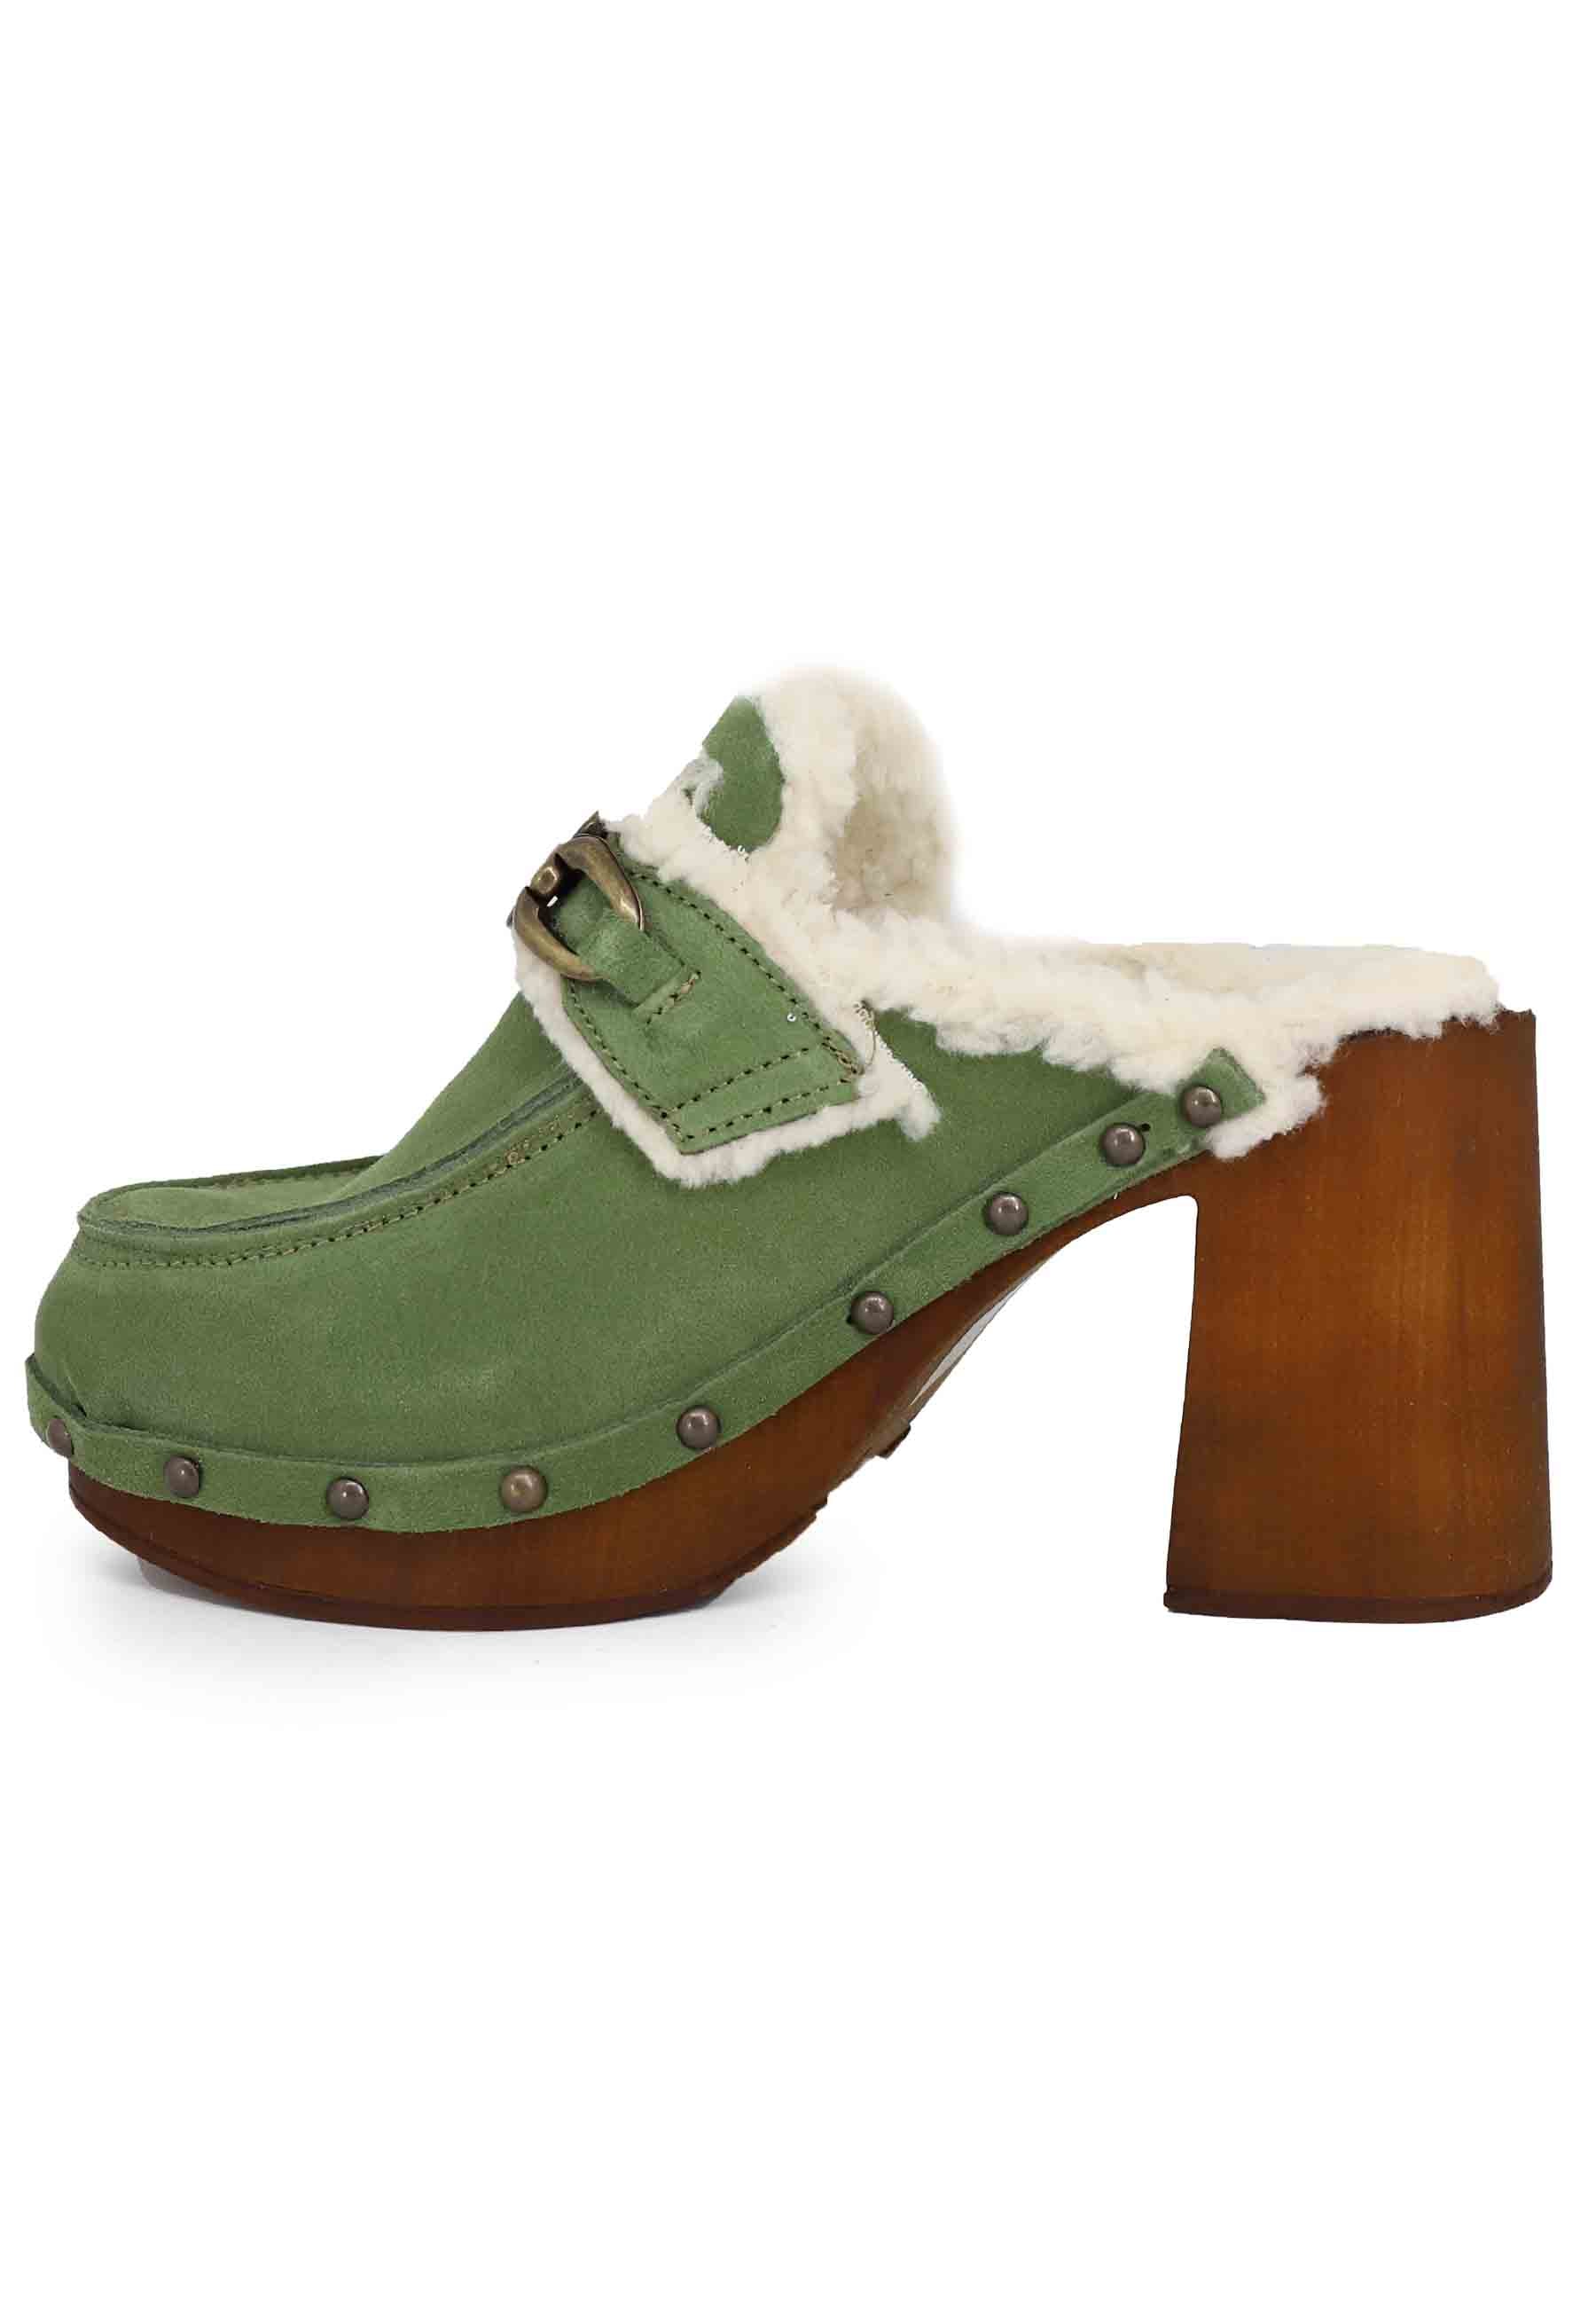 Women's clogs in green suede with eco fur lining and high heel